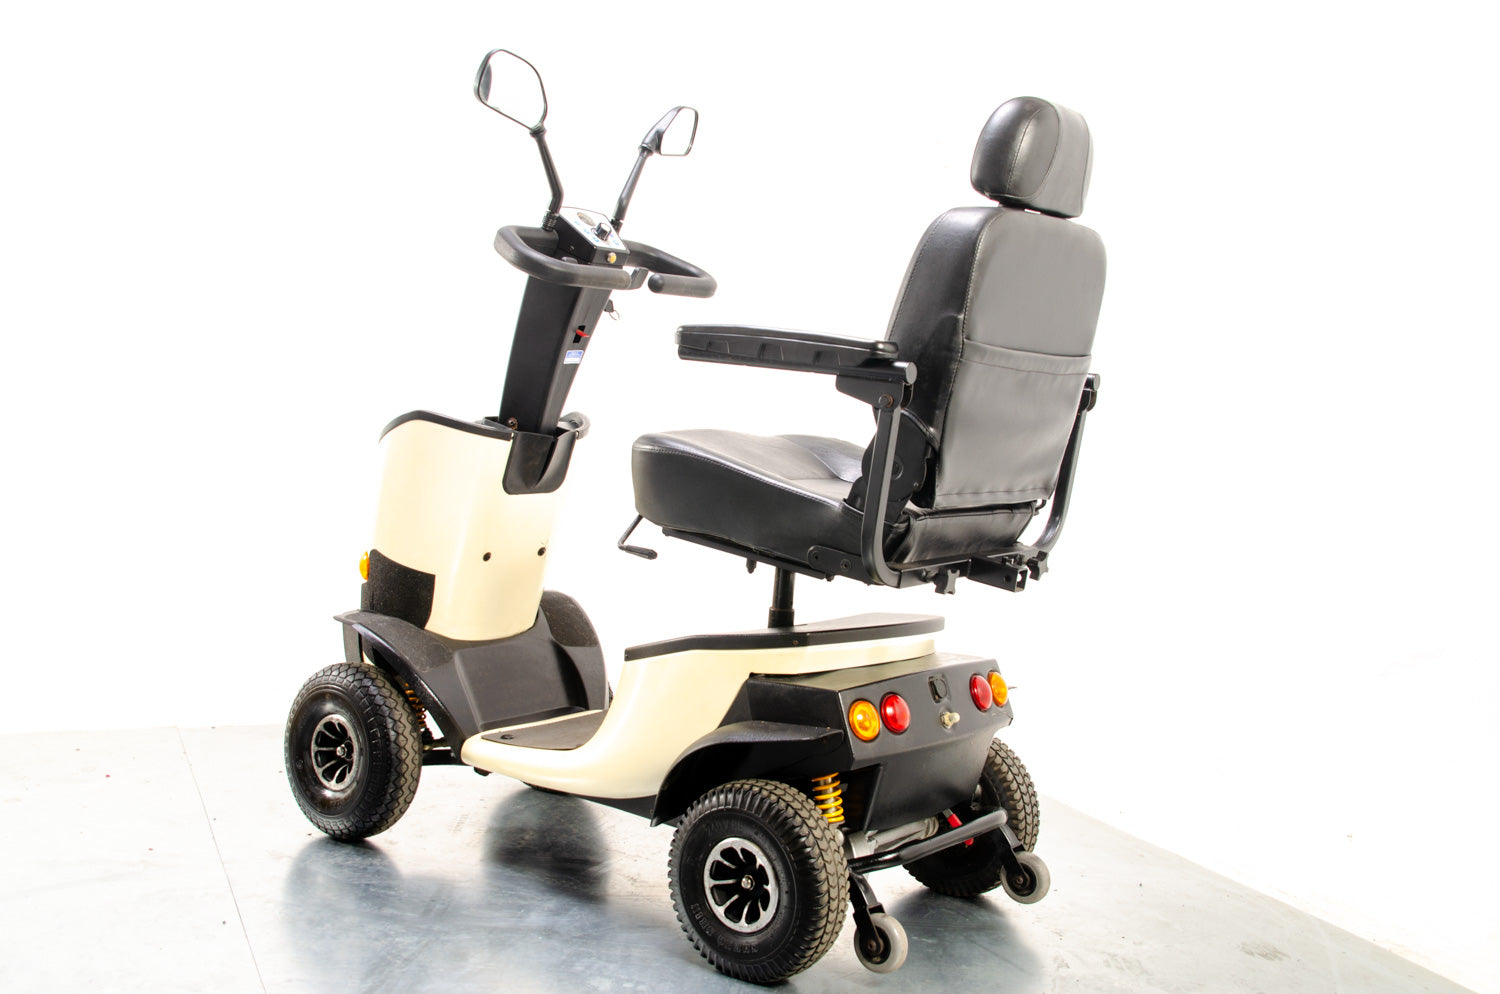 2014 Solax Buggie from Monarch 6mph Midsize Mobility Scooter in Cream White